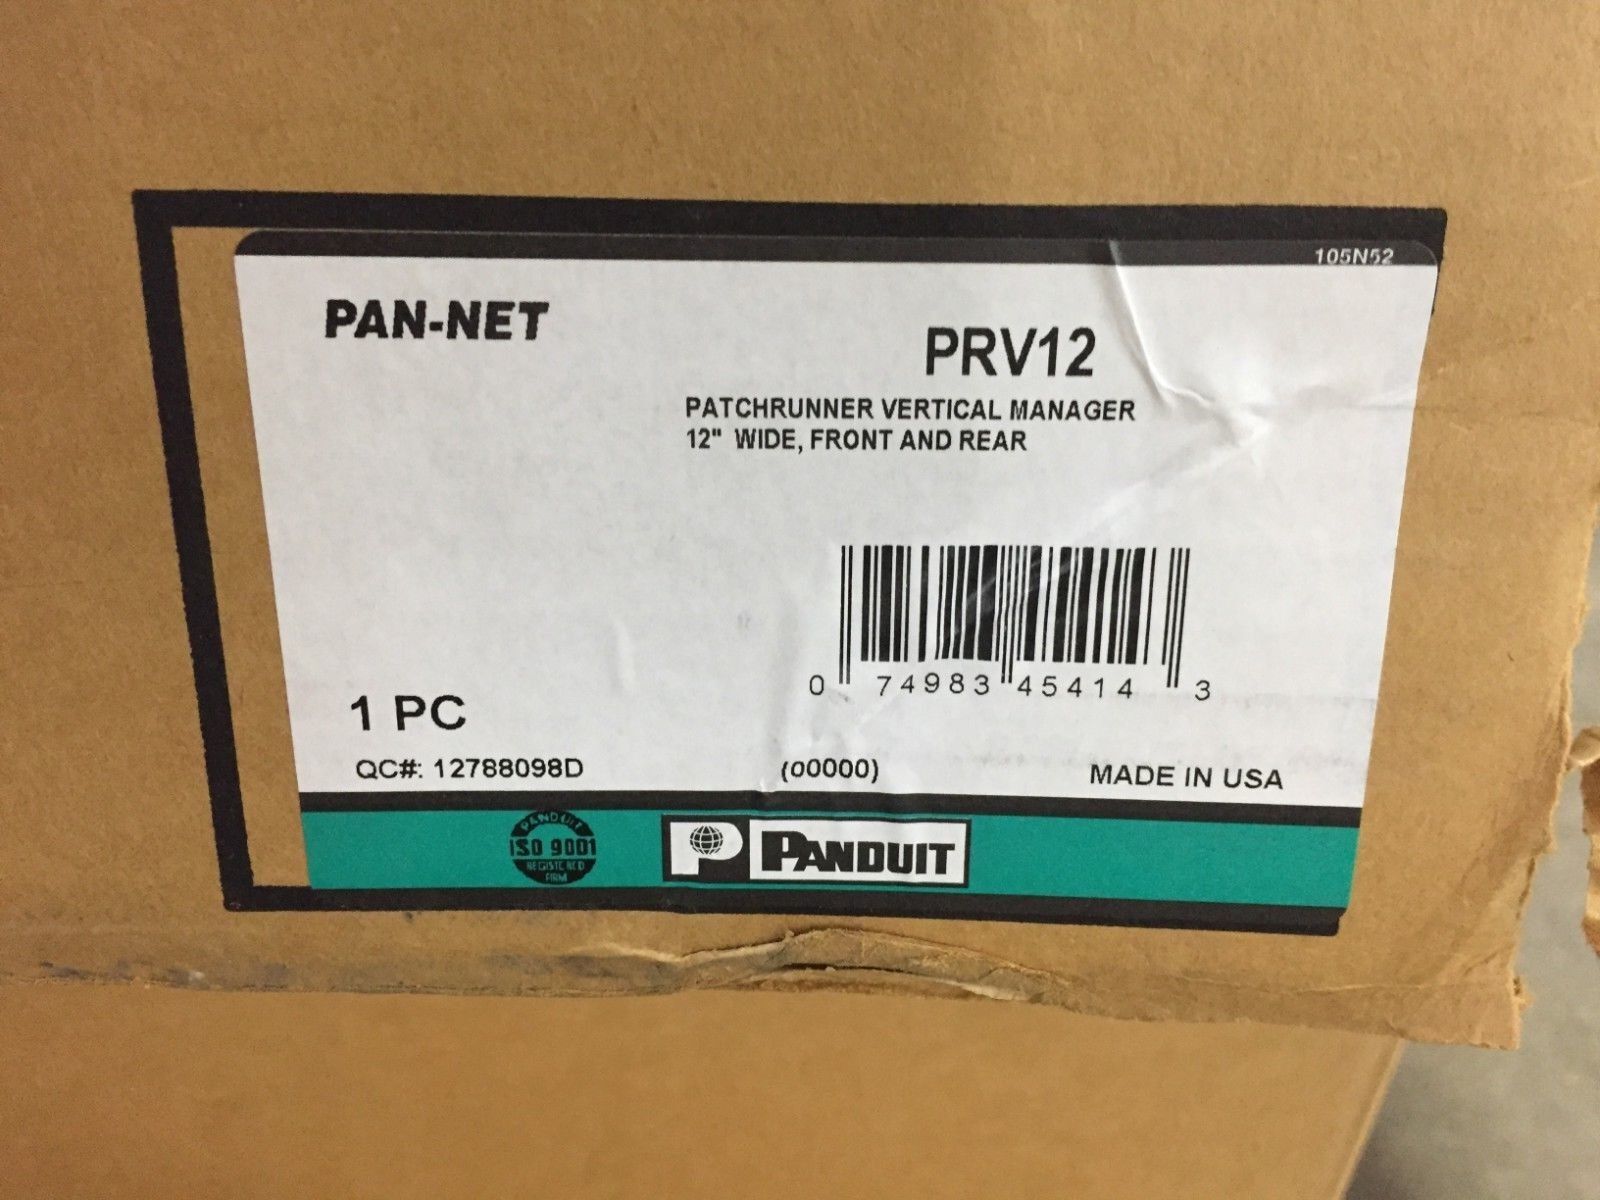 Panduit PRV12 Patchrunner Vertical Cable Manager Dual-sided, Steel, 45RU, Black